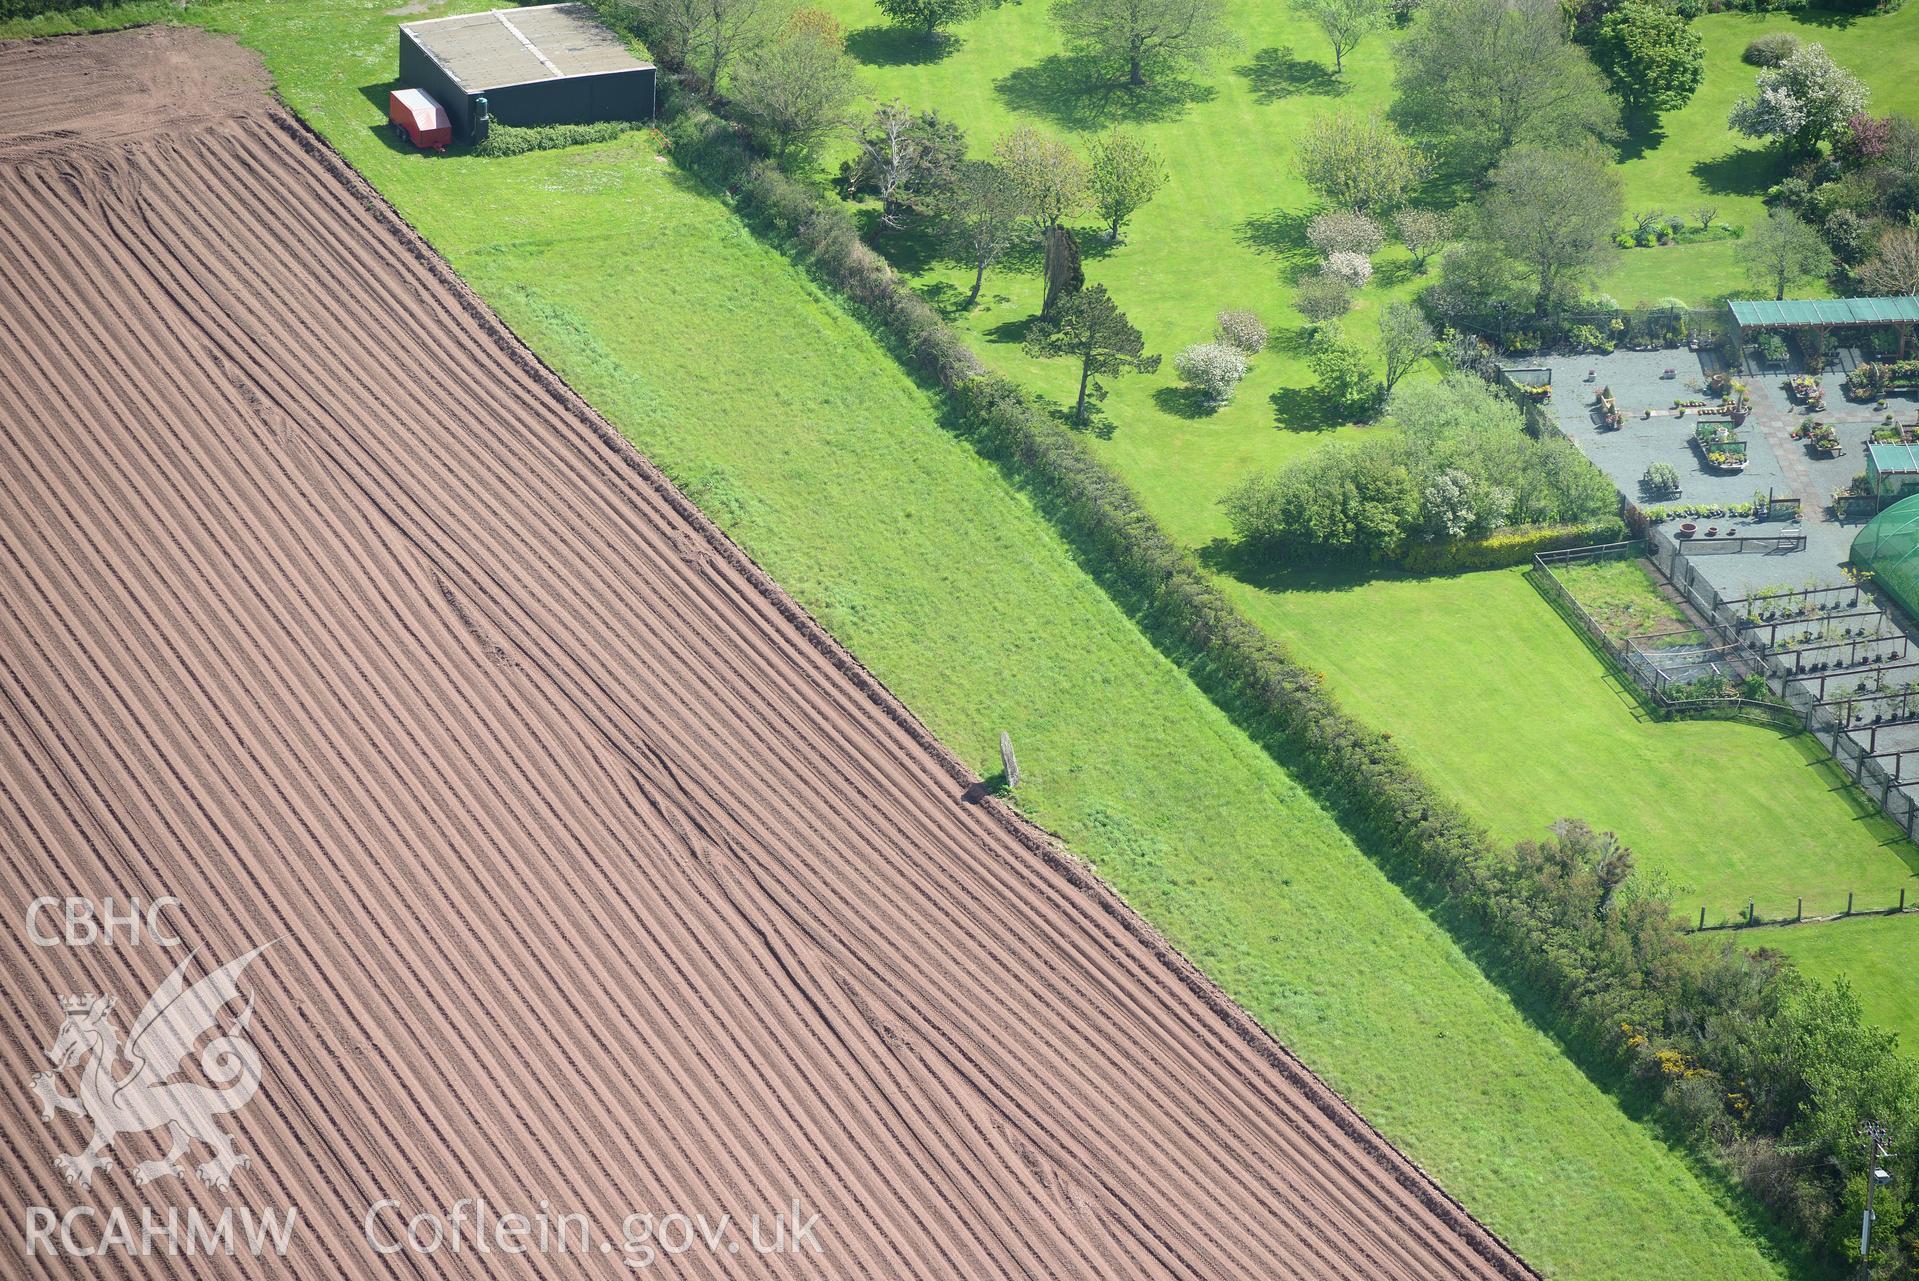 Longstone standing stone near Mabesgate, St. Ishmaels. Oblique aerial photograph taken during the Royal Commission's programme of archaeological aerial reconnaissance by Toby Driver on 15th May 2015.